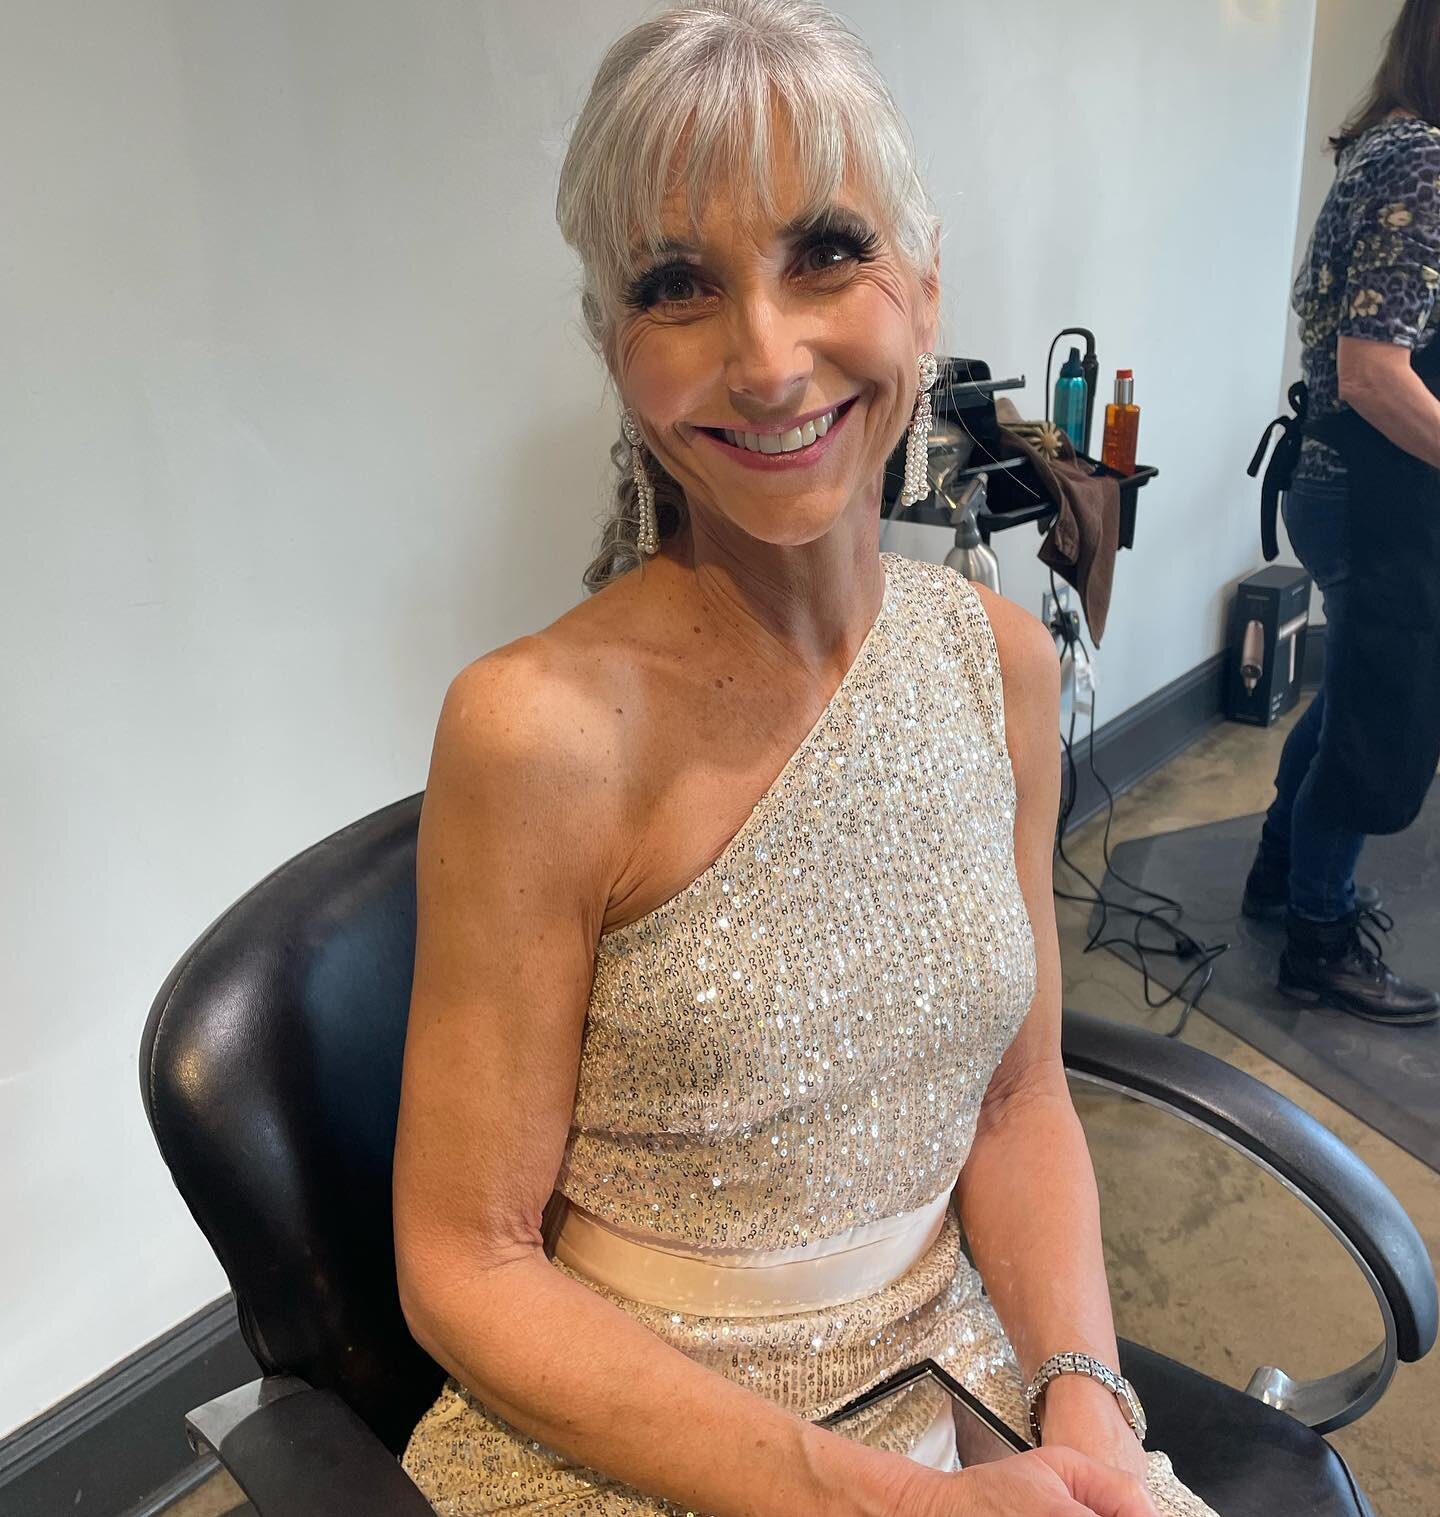 What a beauty😍😍😍&hellip; @hammondcherie ready for Dancing with the stars .
Beautiful elegant up-do done by our very talented salon owner/stylist Trish Mason.
Glamorous makeup look done by our very talented stylist/colorist @jarinjo